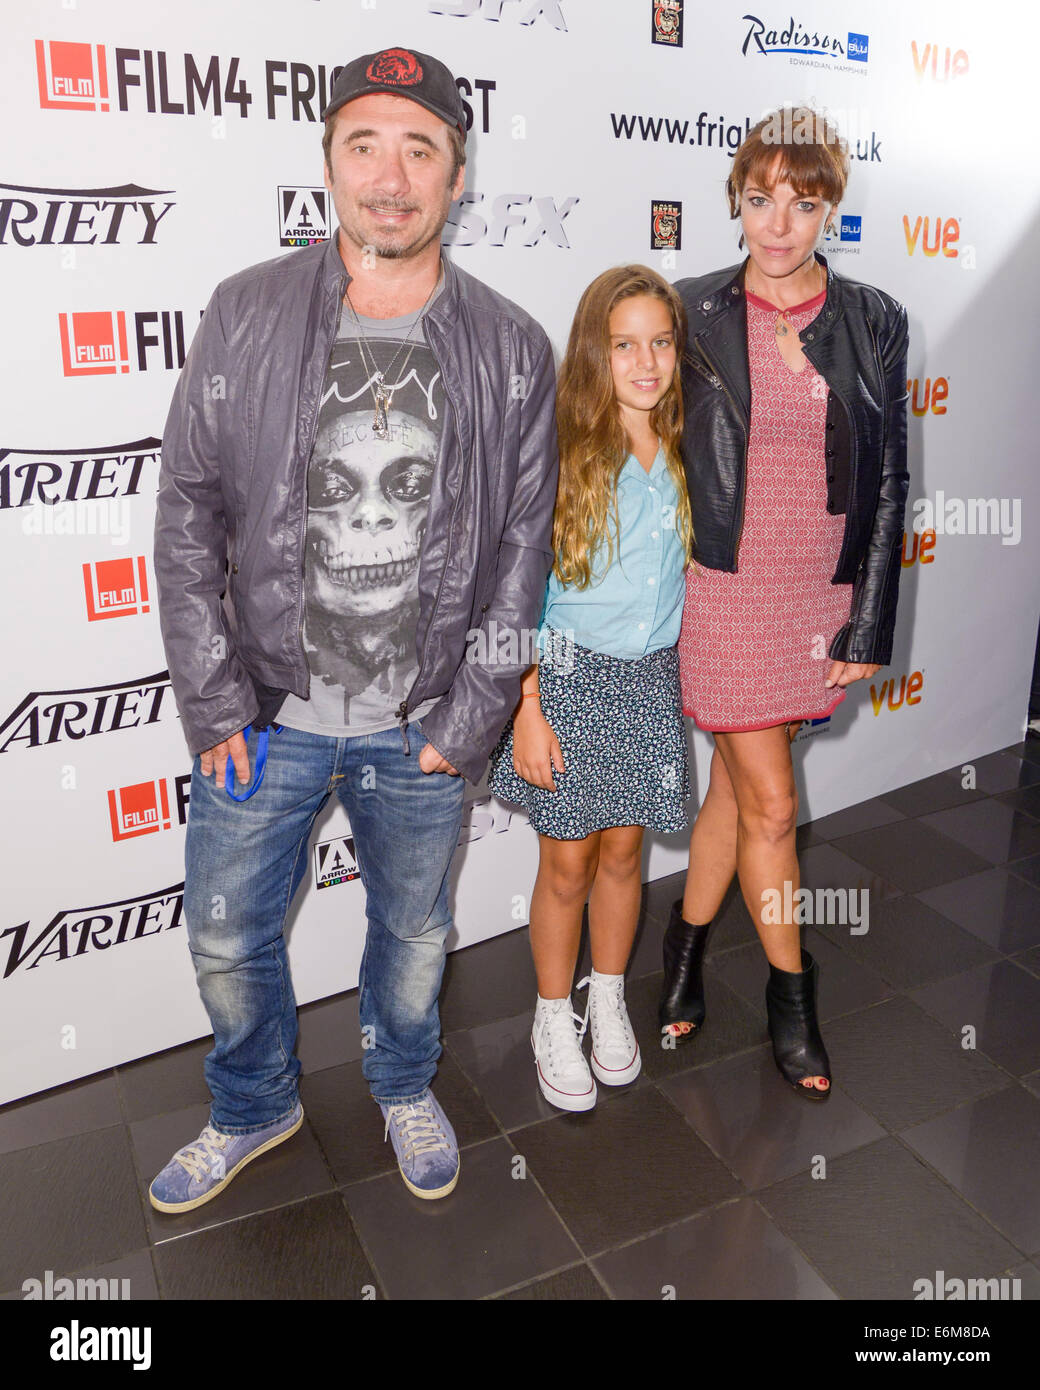 The 15th Film4 Frightfest on 25/08/2014 at The VUE West End, London. Director Frederico Zampanglione & Rosa Enginoli attend the World Premiere of thier short film Remember. Persons pictured: Frederico Zampanglione, Claudia Gerini, Rosa Enginoli. Picture by Julie Edwards Stock Photo